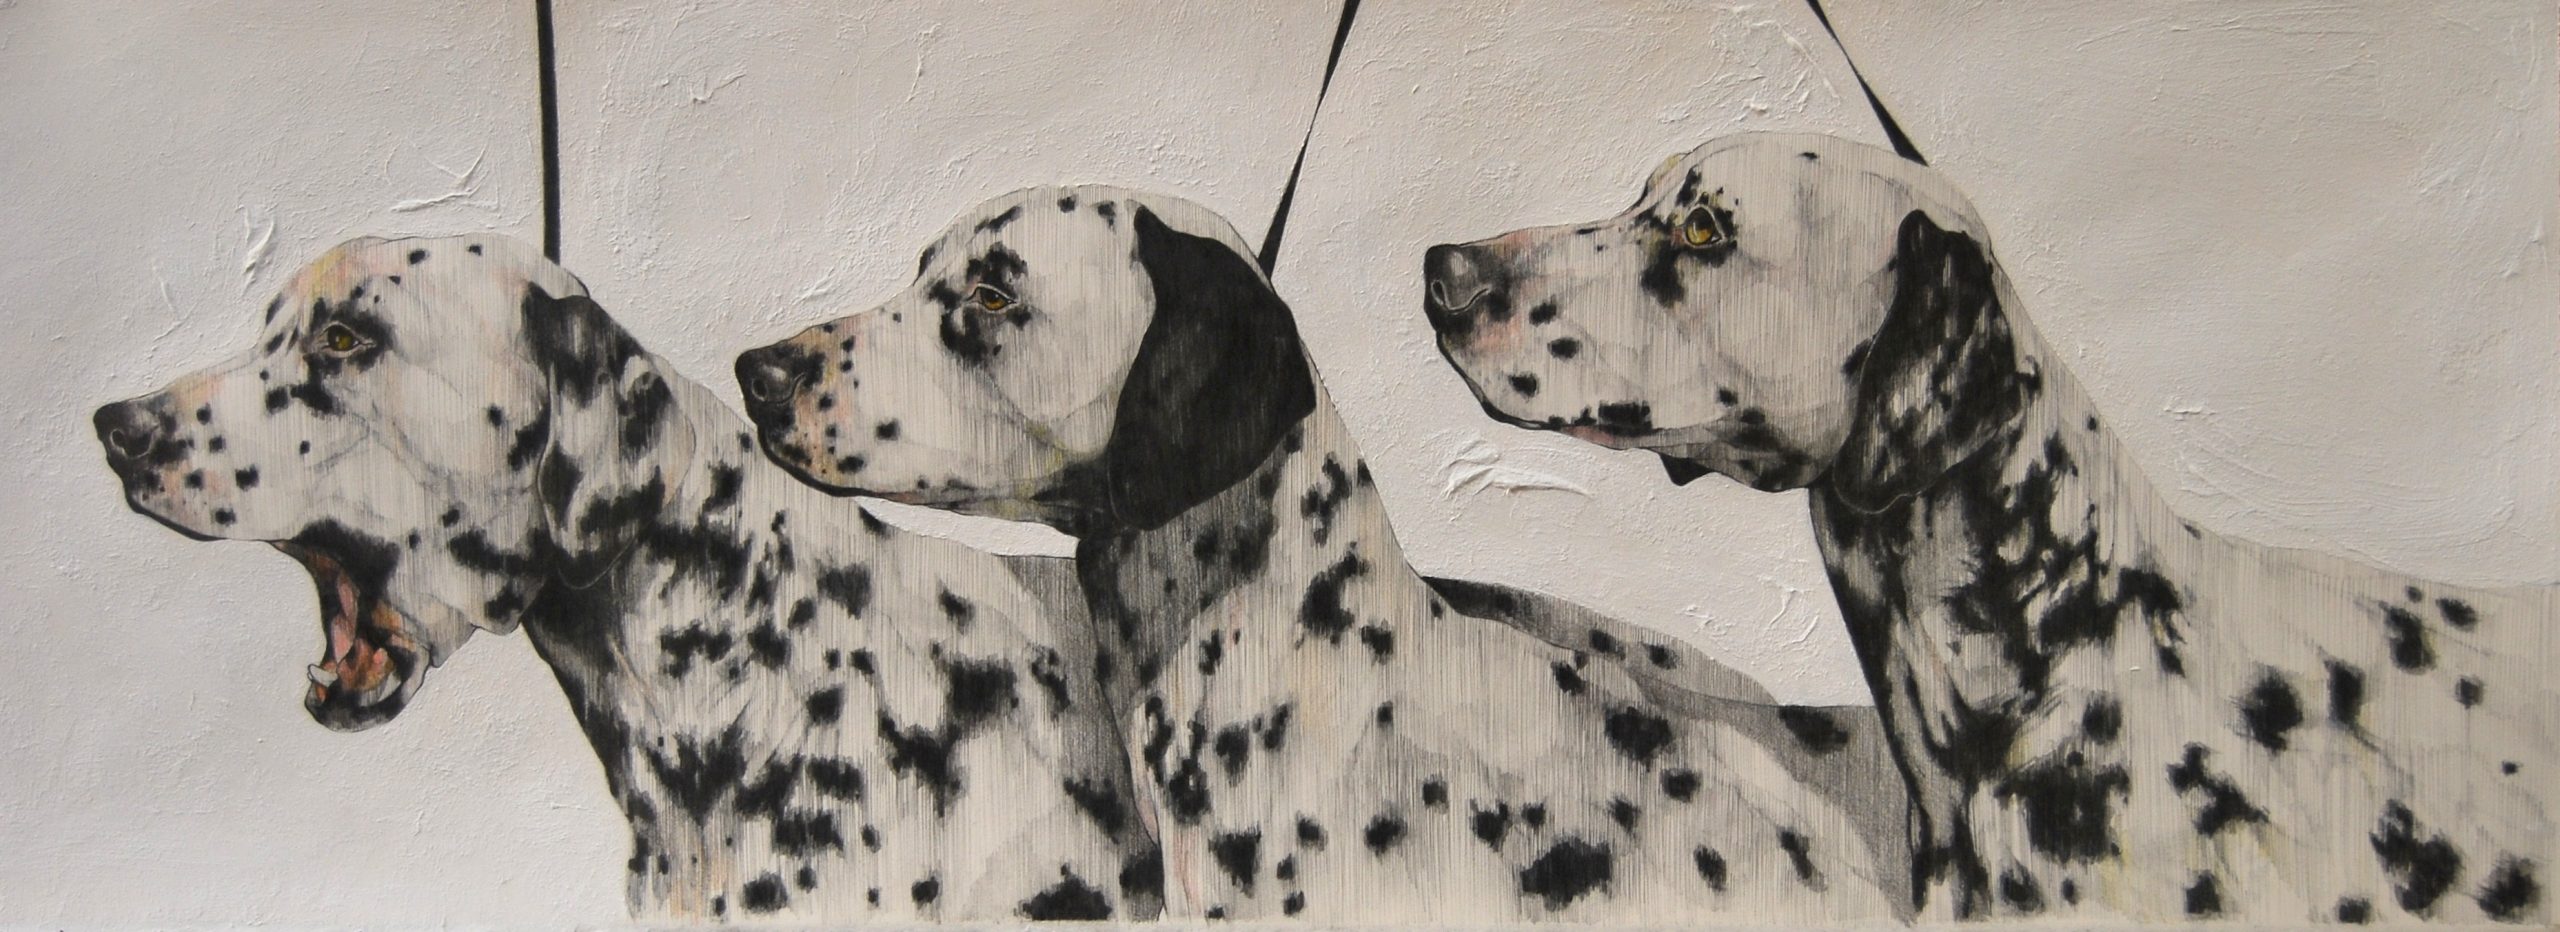 Dalmations Waiting for the judges, Sydney Royal Easter Show. Pencil on Paper. 48x116cm